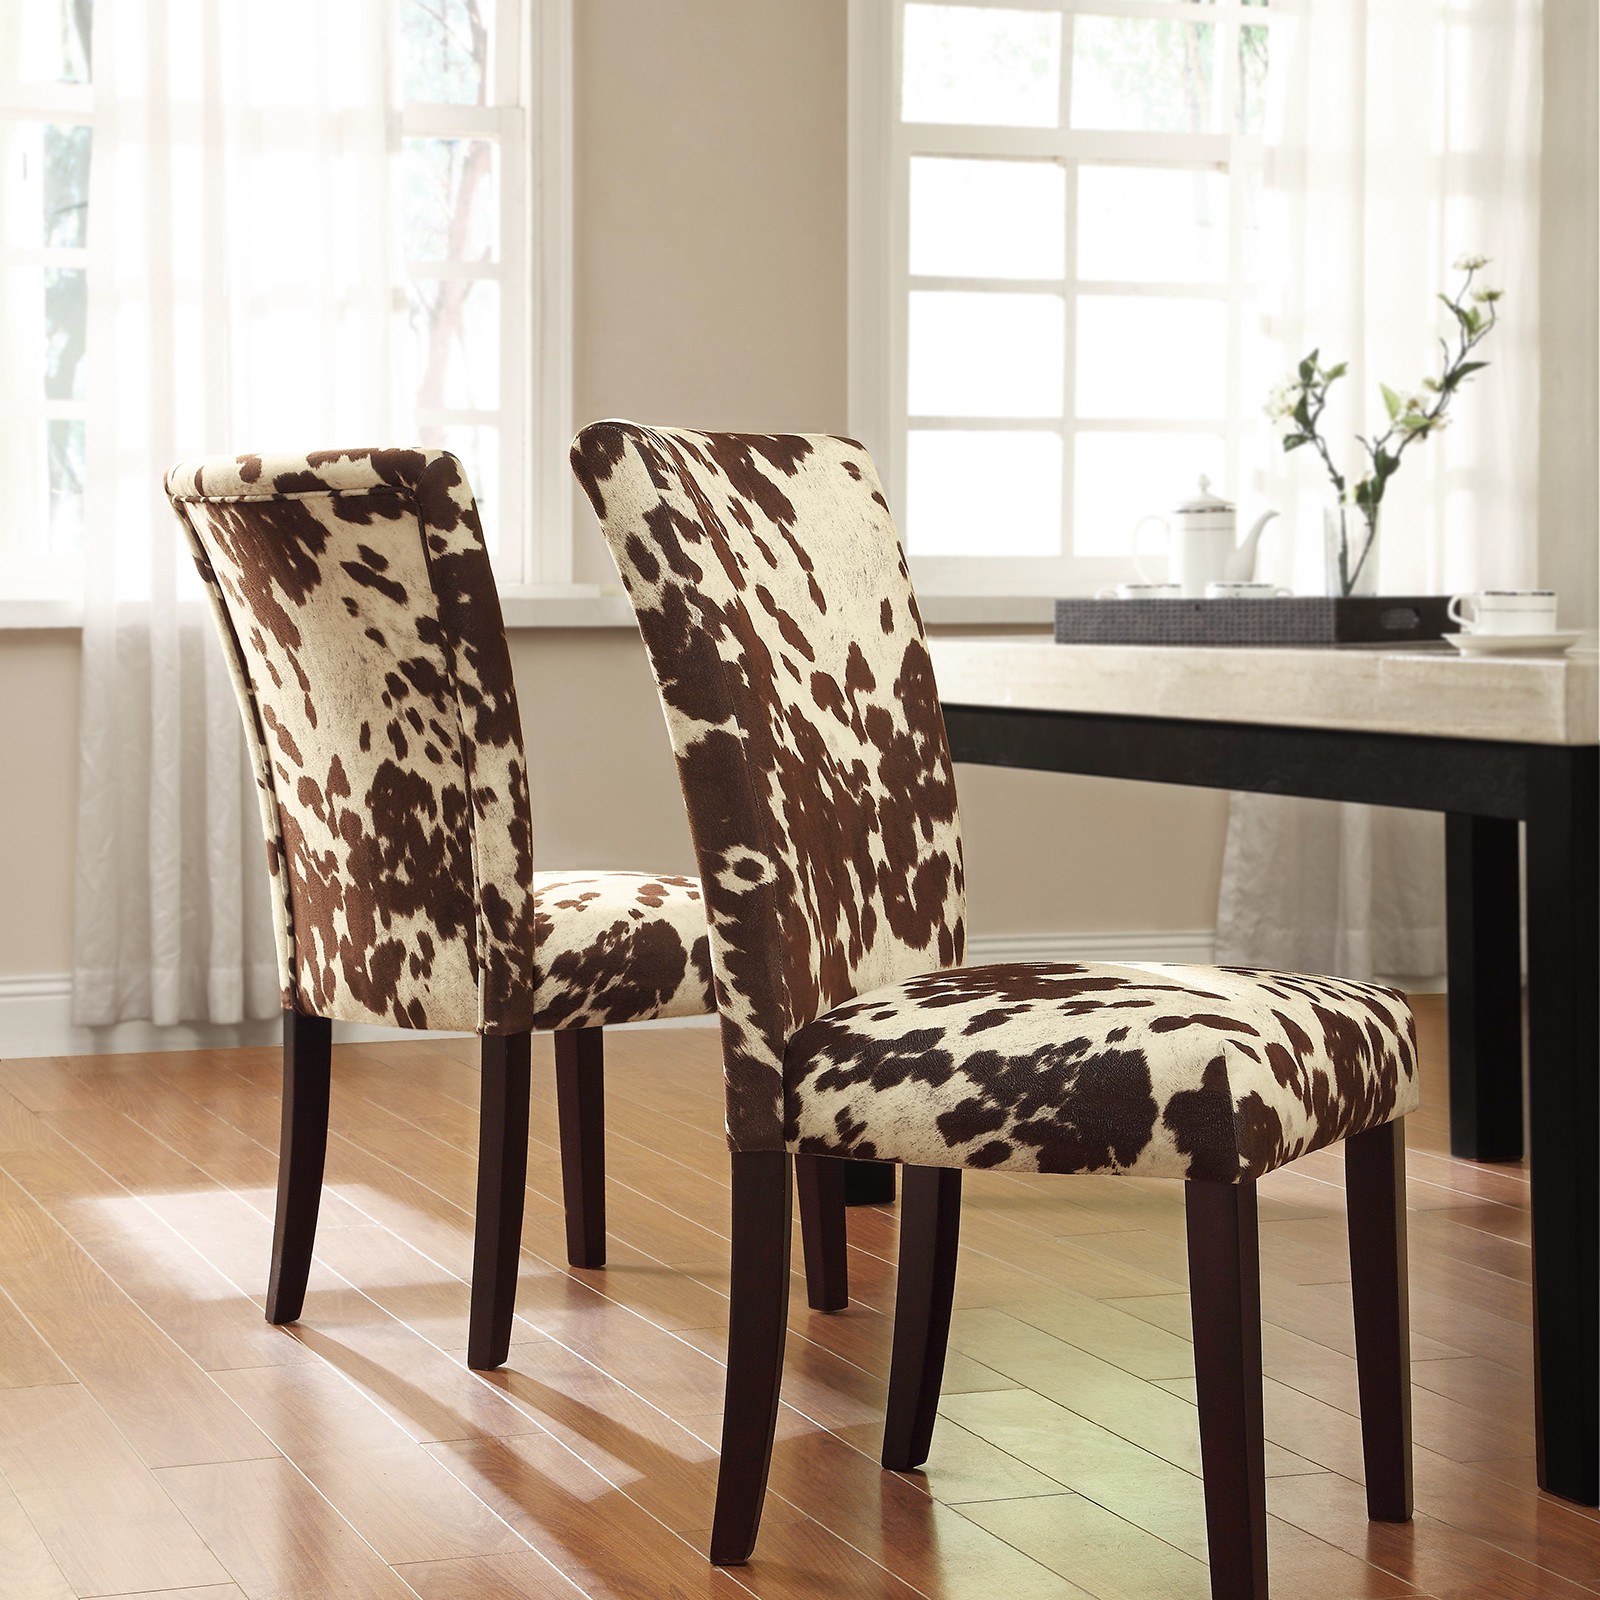 Home Portman Cow Hide Parson Side Chairs (Set of 2), These Parsons Chairs are an Elegant Addition to Your Dining Room Furniture Ensenble. The Supple Cow Hide Print Fabric Adds Comfort to These Side Chairs (Black)